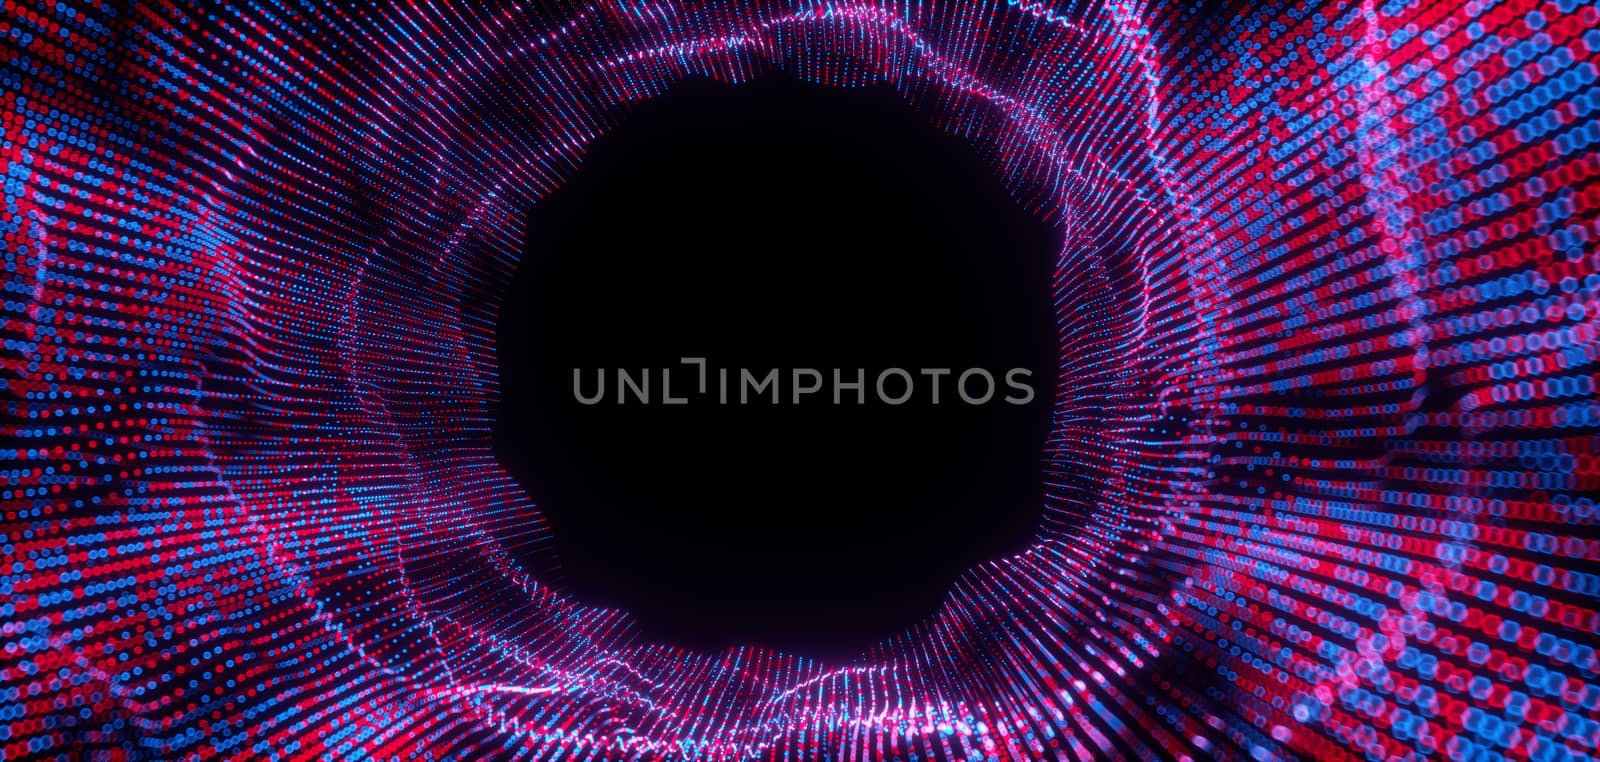 Abstract big data futuristic light wallpaper background design. Science dark pattern with structure mesh and circles. Modern business space dots illustration. 3D render